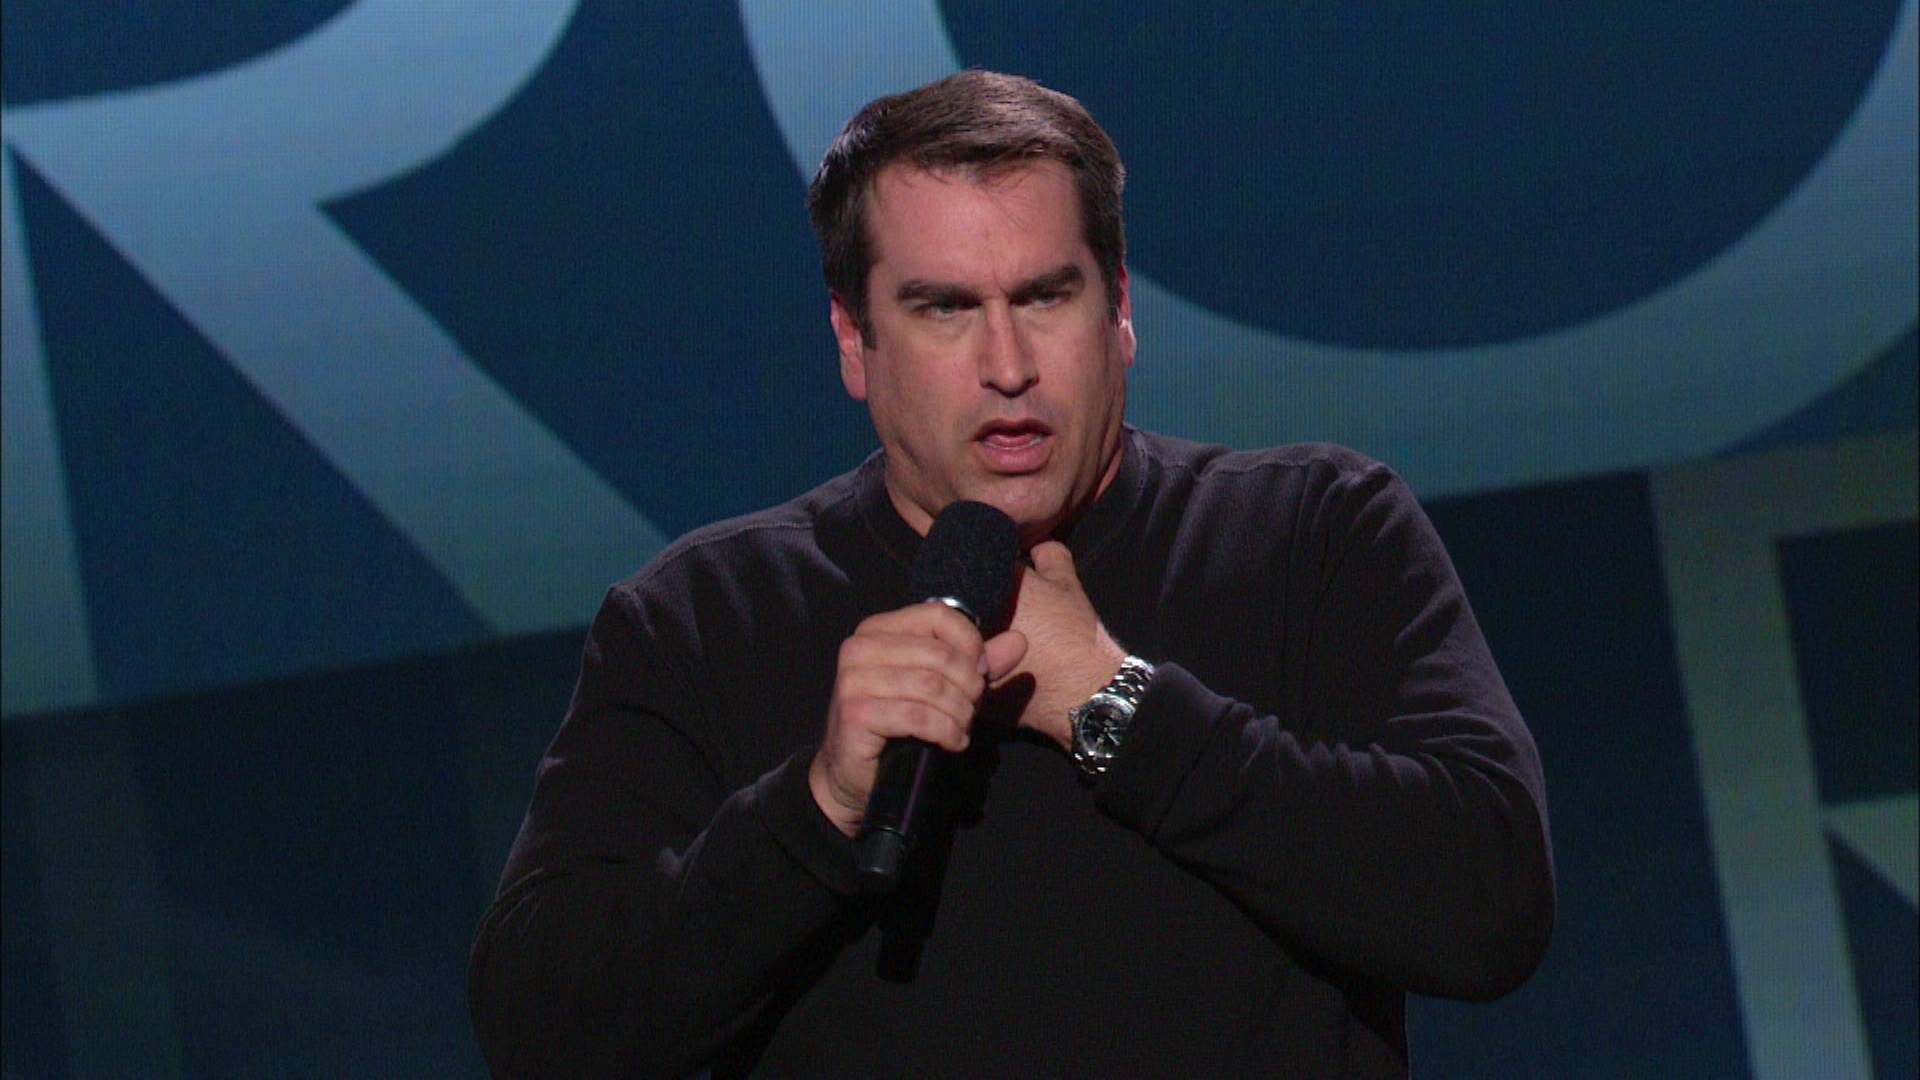 Rob Riggle chats about his new movie 'Cursed Friends